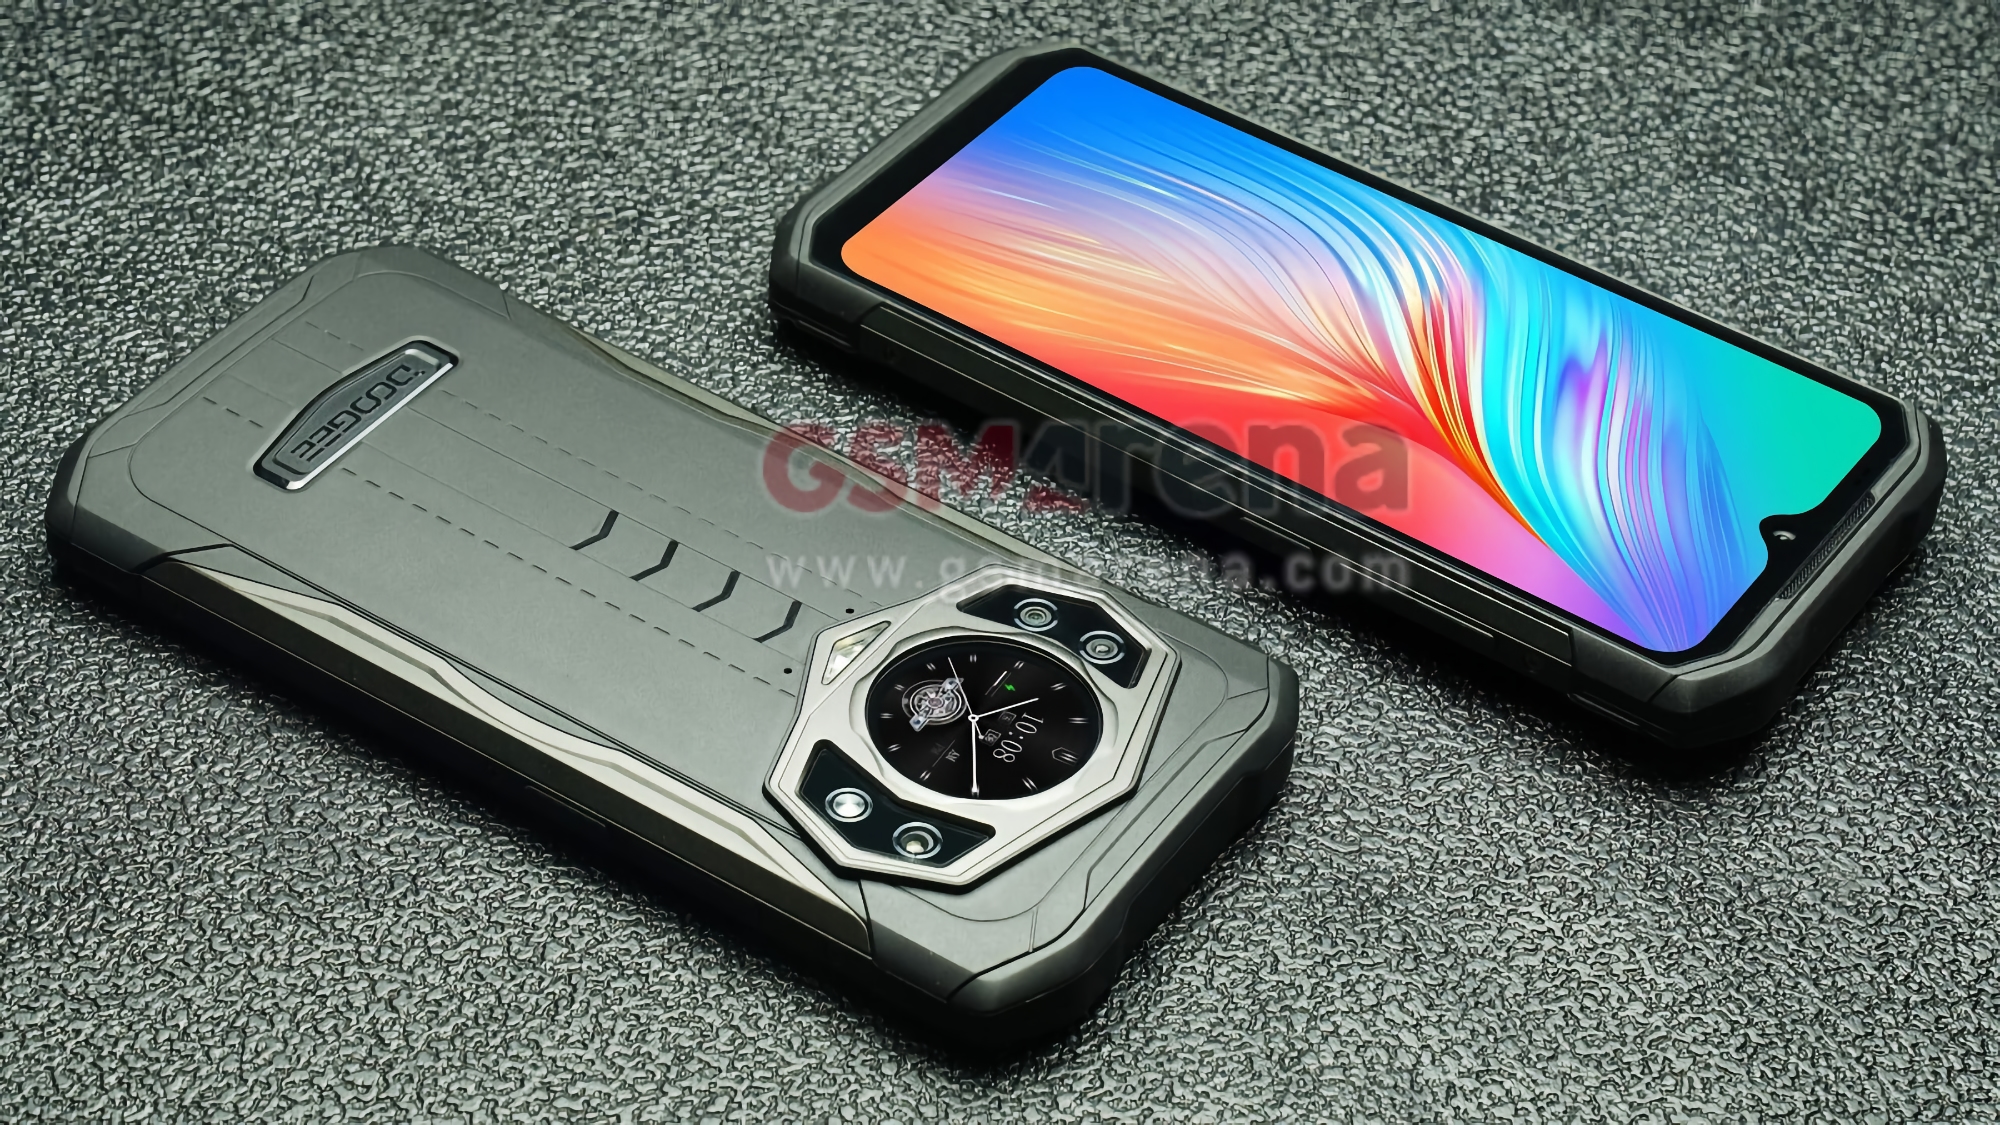 Doogee S98 will be like this: a shock-resistant smartphone with two displays and a night vision camera